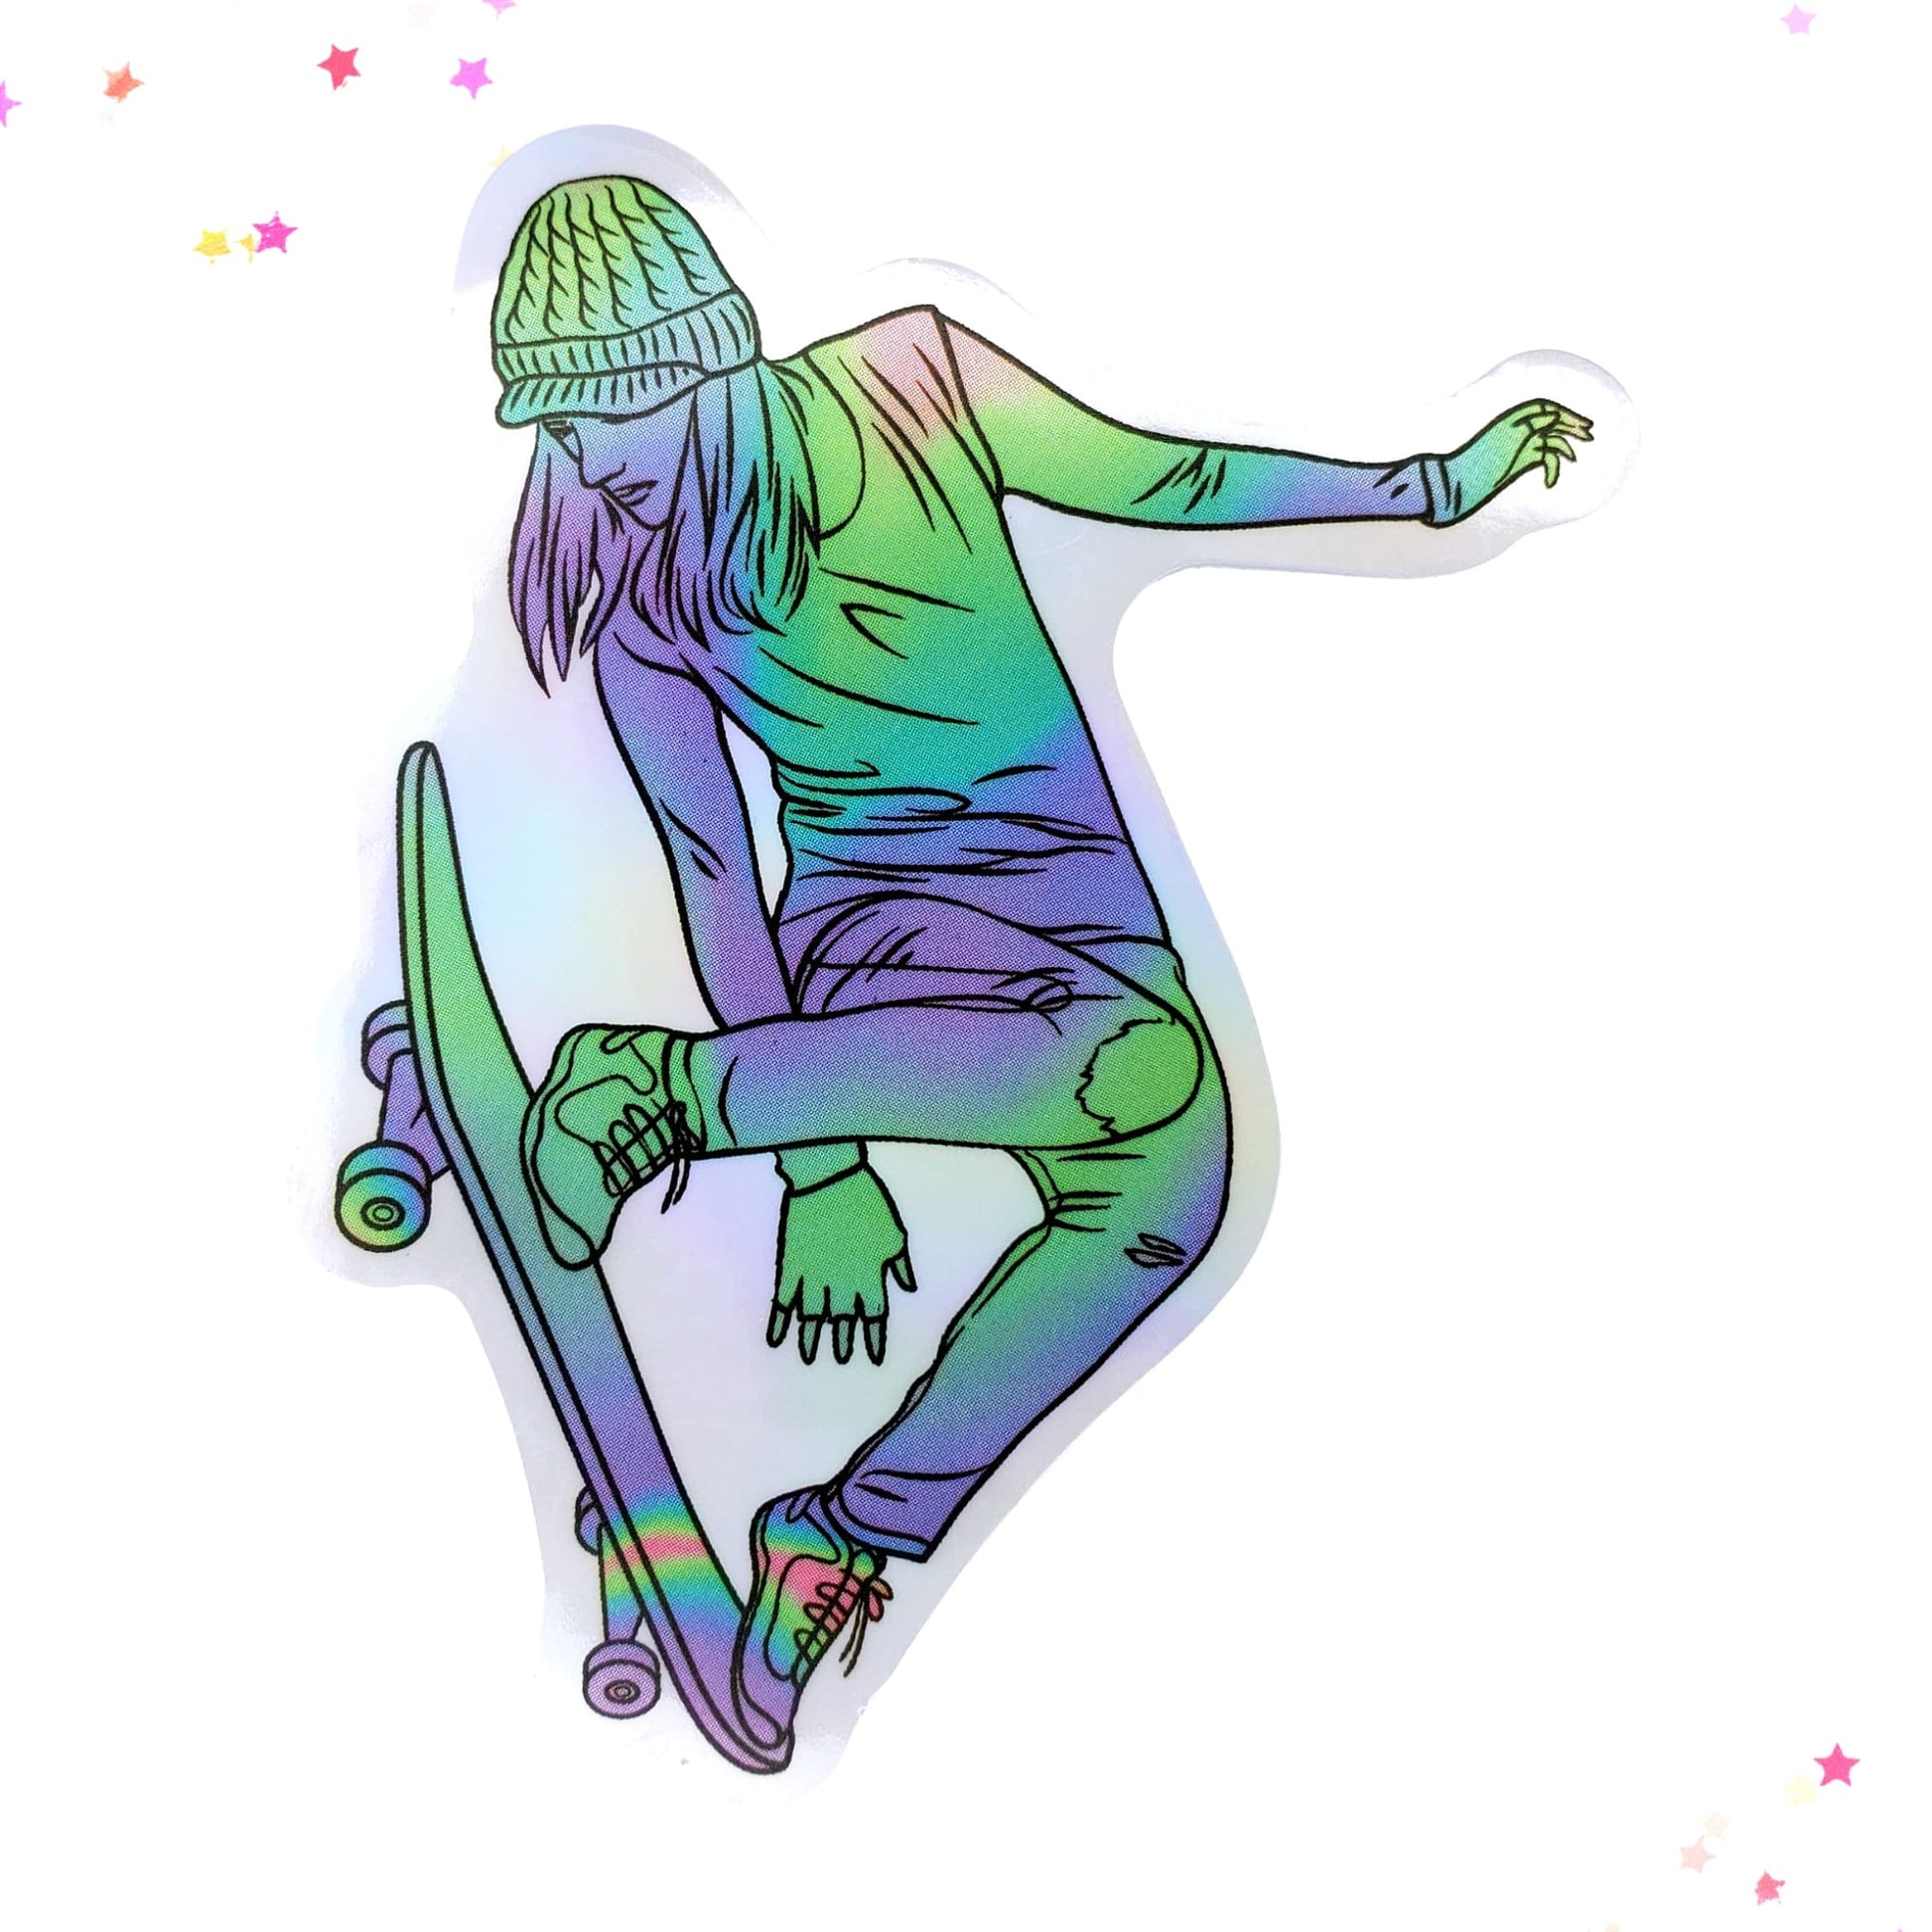 Green Blue Purple Gradient Skater Girl Waterproof Holographic Sticker from Confetti Kitty, Only 1.00